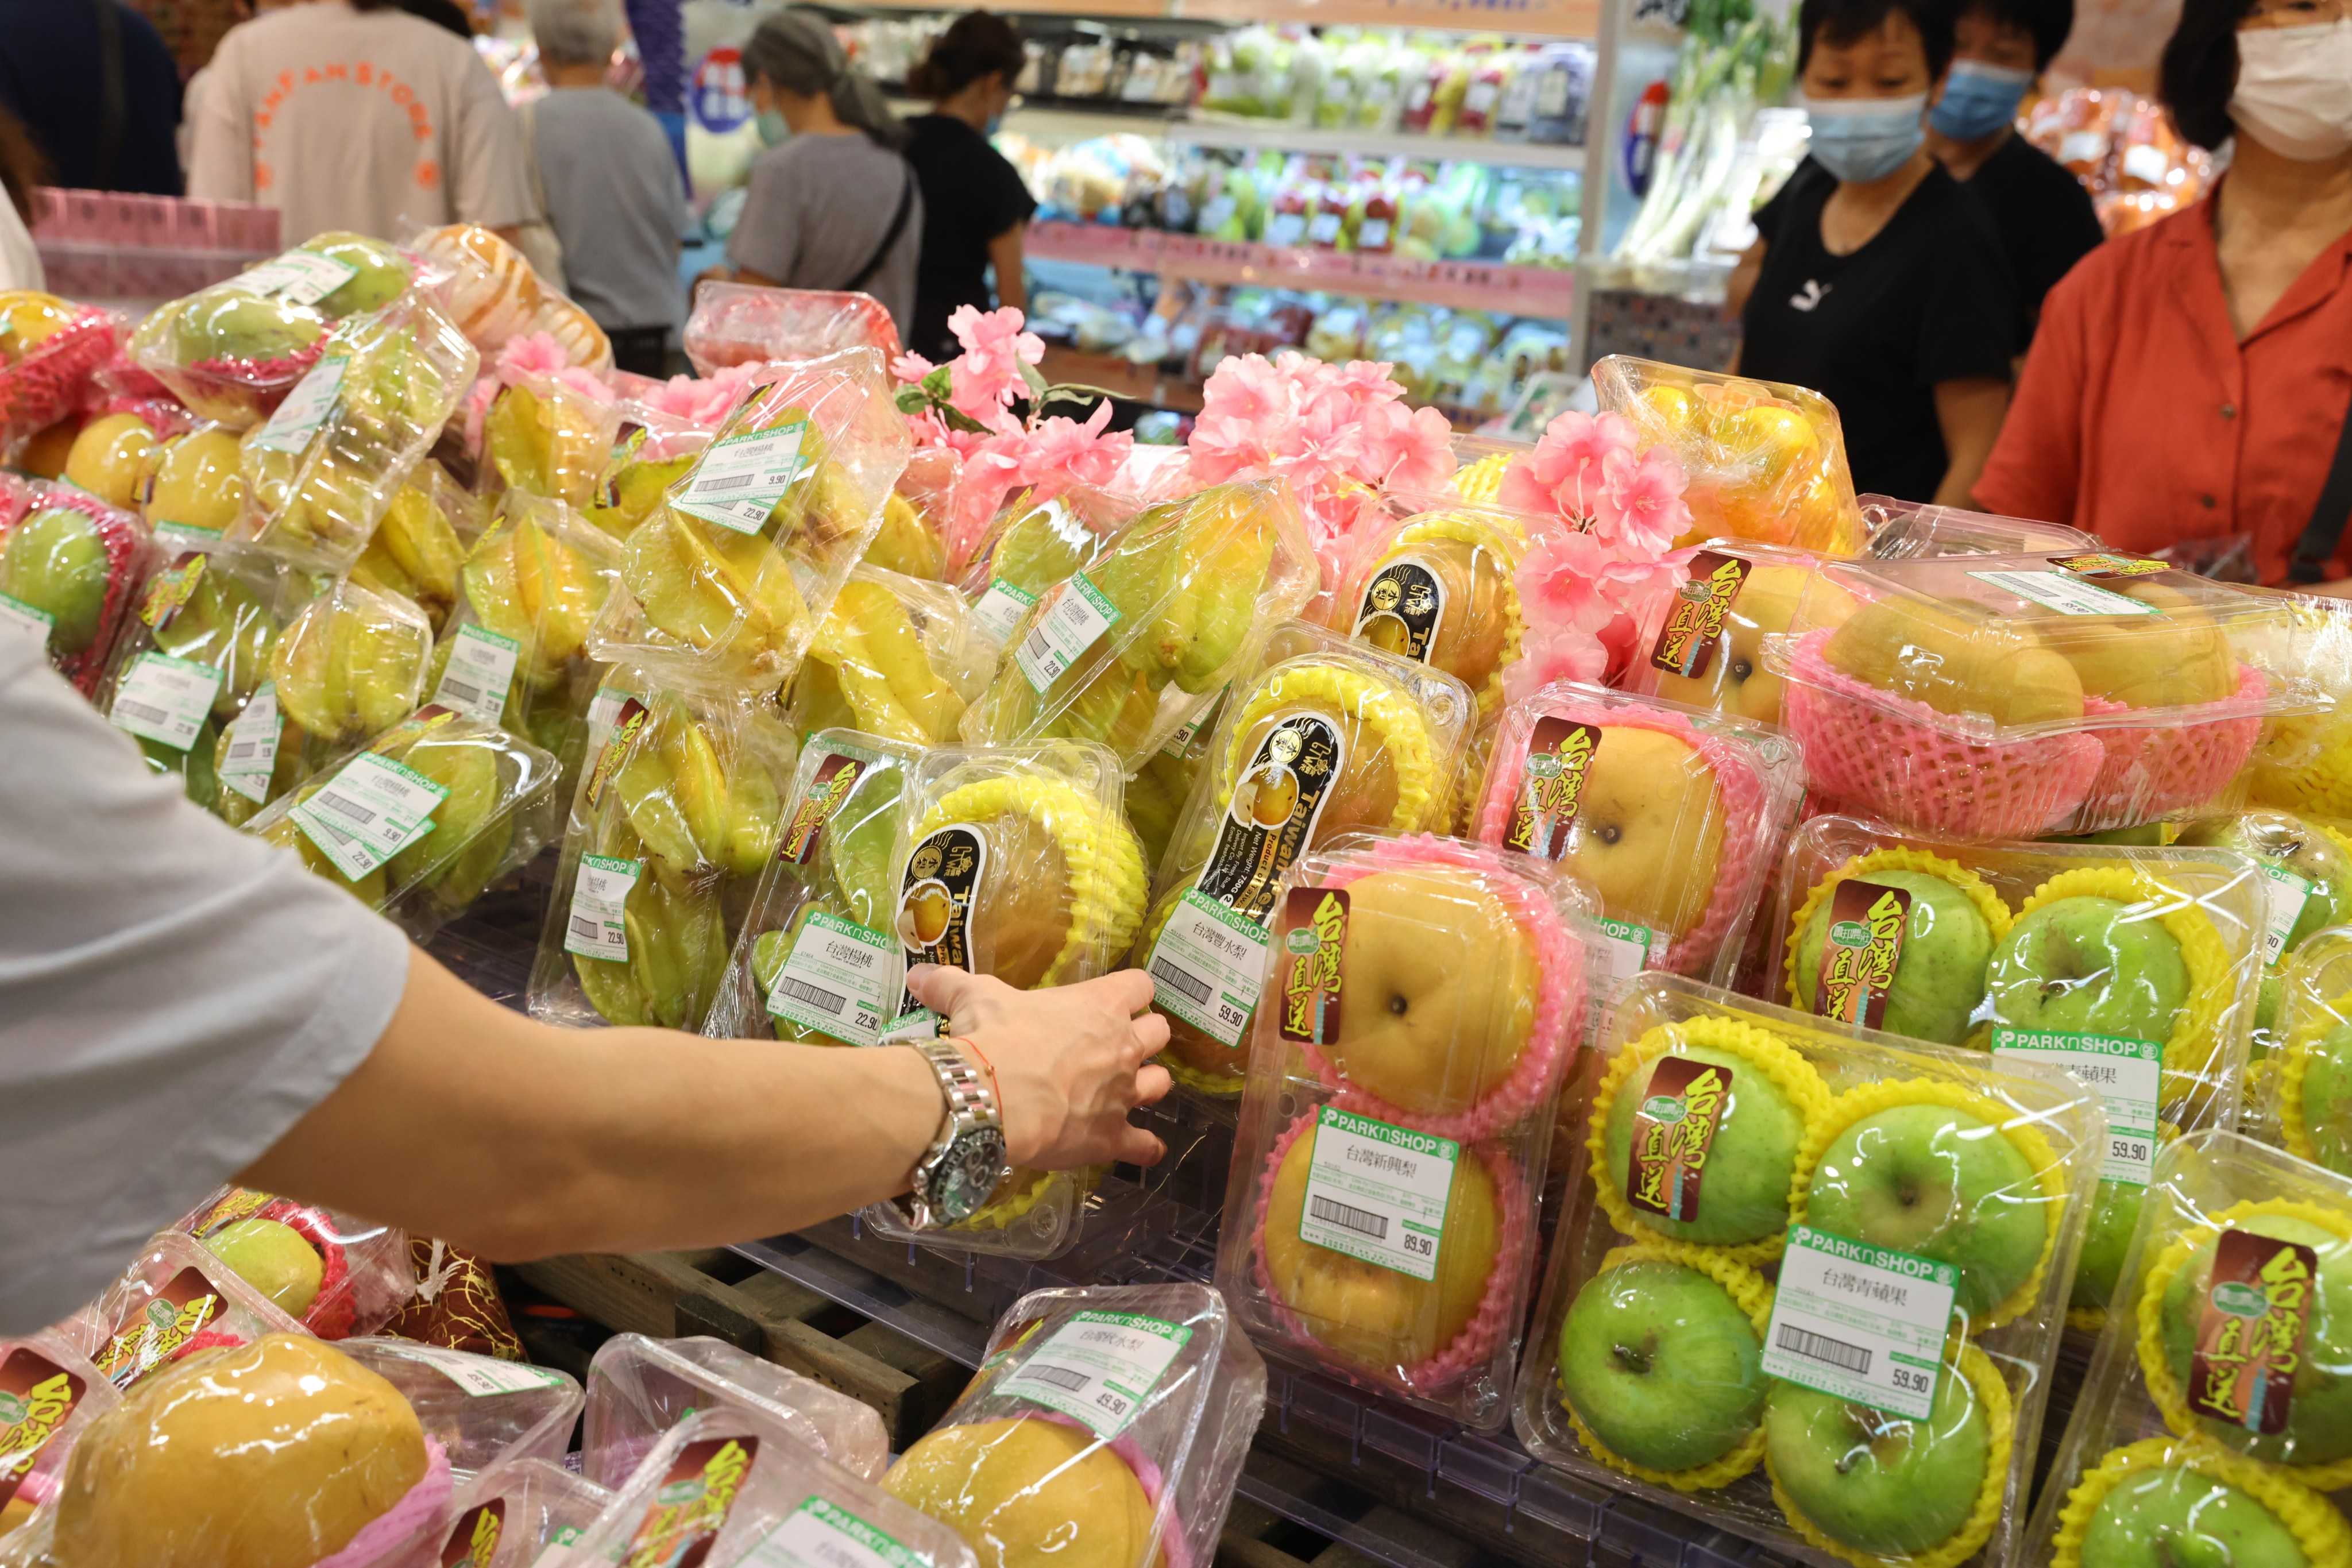 Imported produce is likely to cost Hong Kong shoppers more. Photo: Dickson Lee